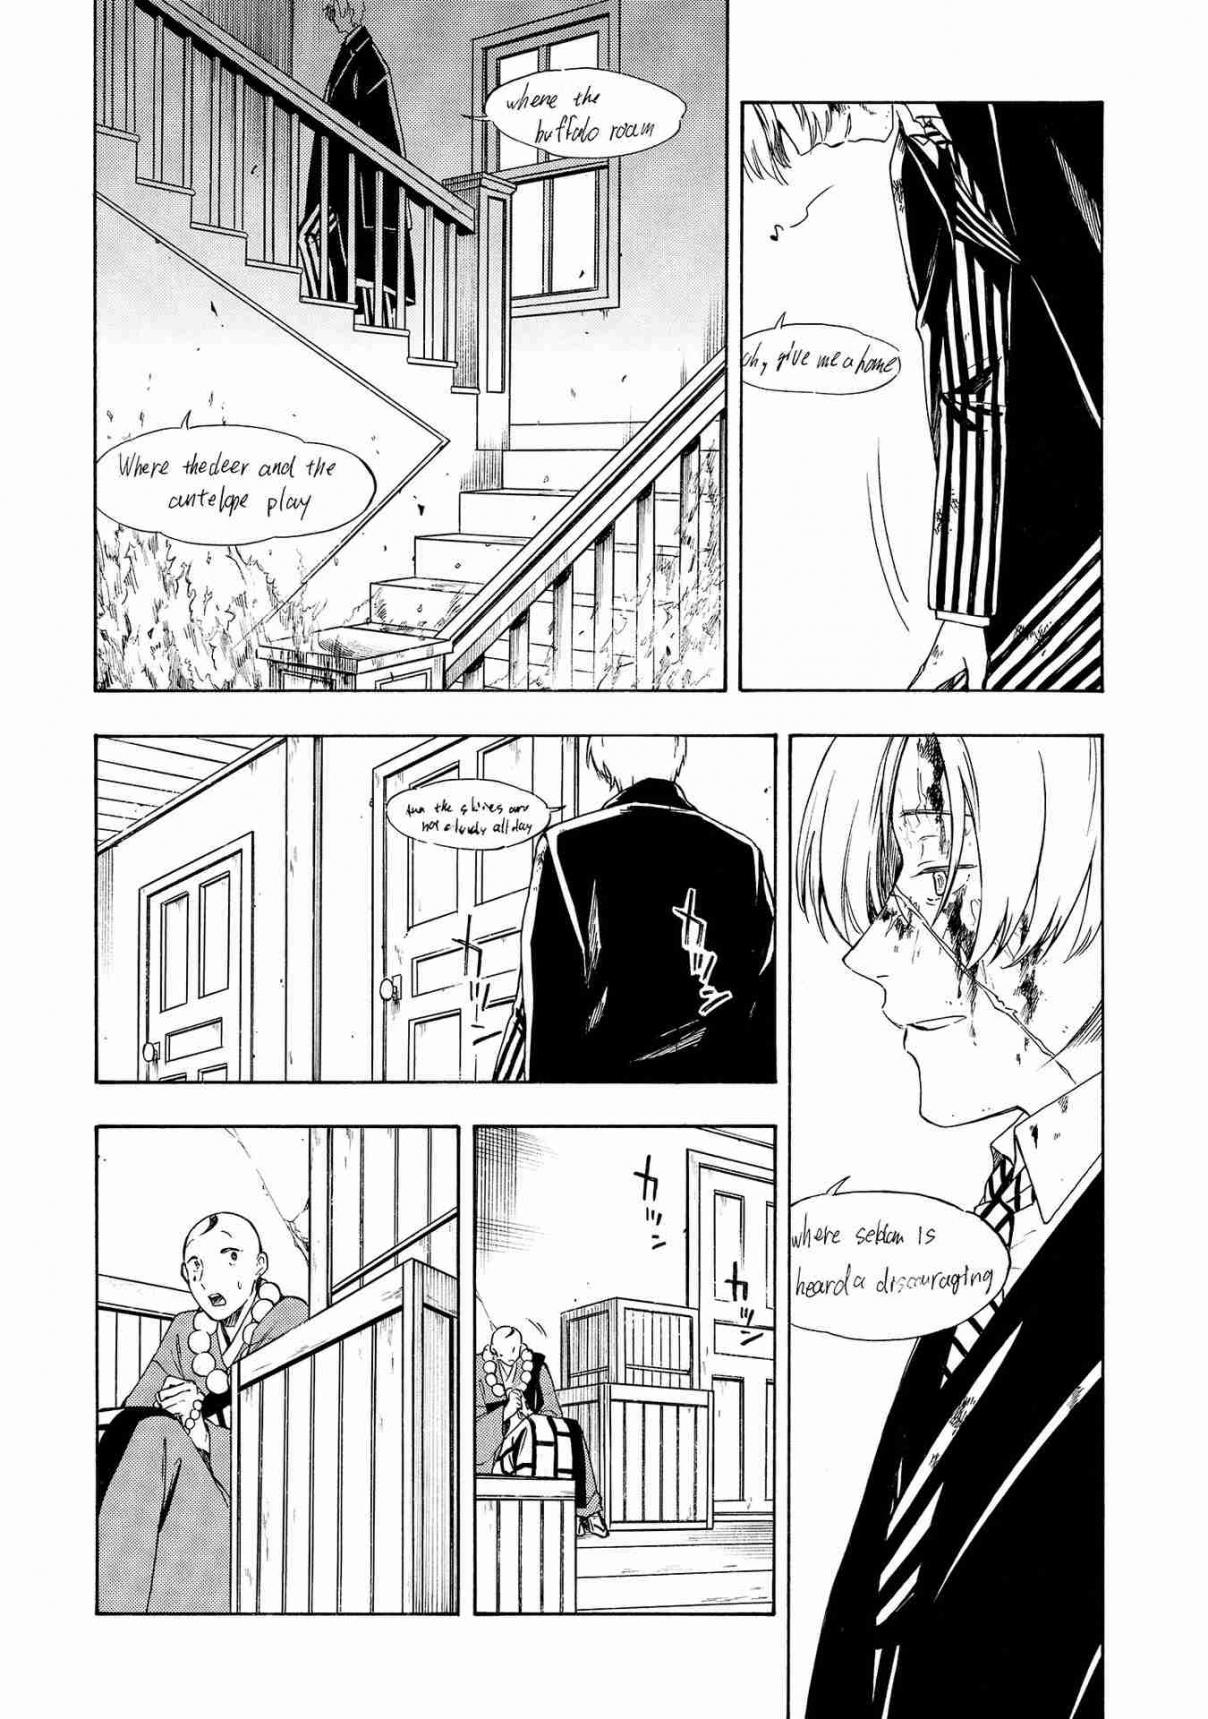 Mouryou Shoujo Vol. 4 Ch. 19 Crime and Punishment Part 2